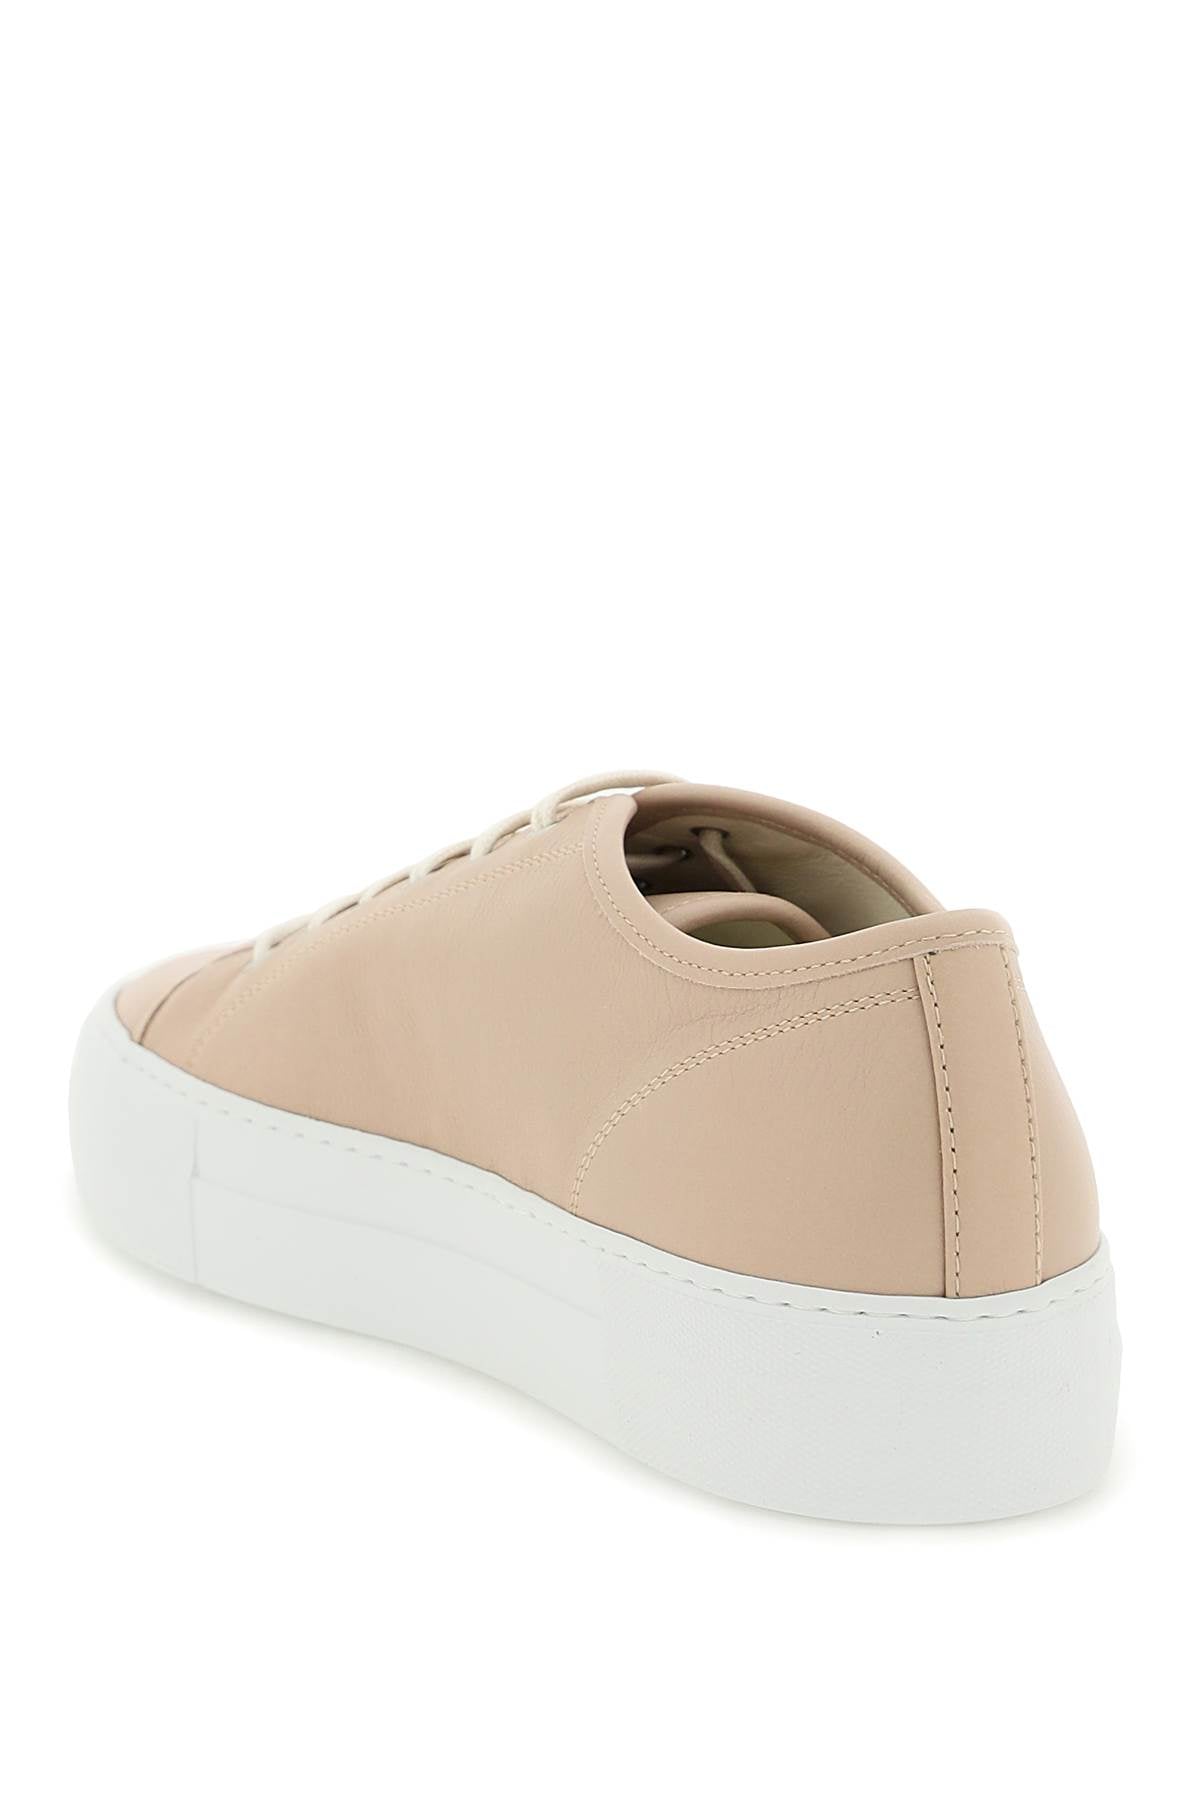 TOURNAMENT LOW SUPER Sneakers for Women - Smooth Leather, Gold-Tone Accents, Removable Insole